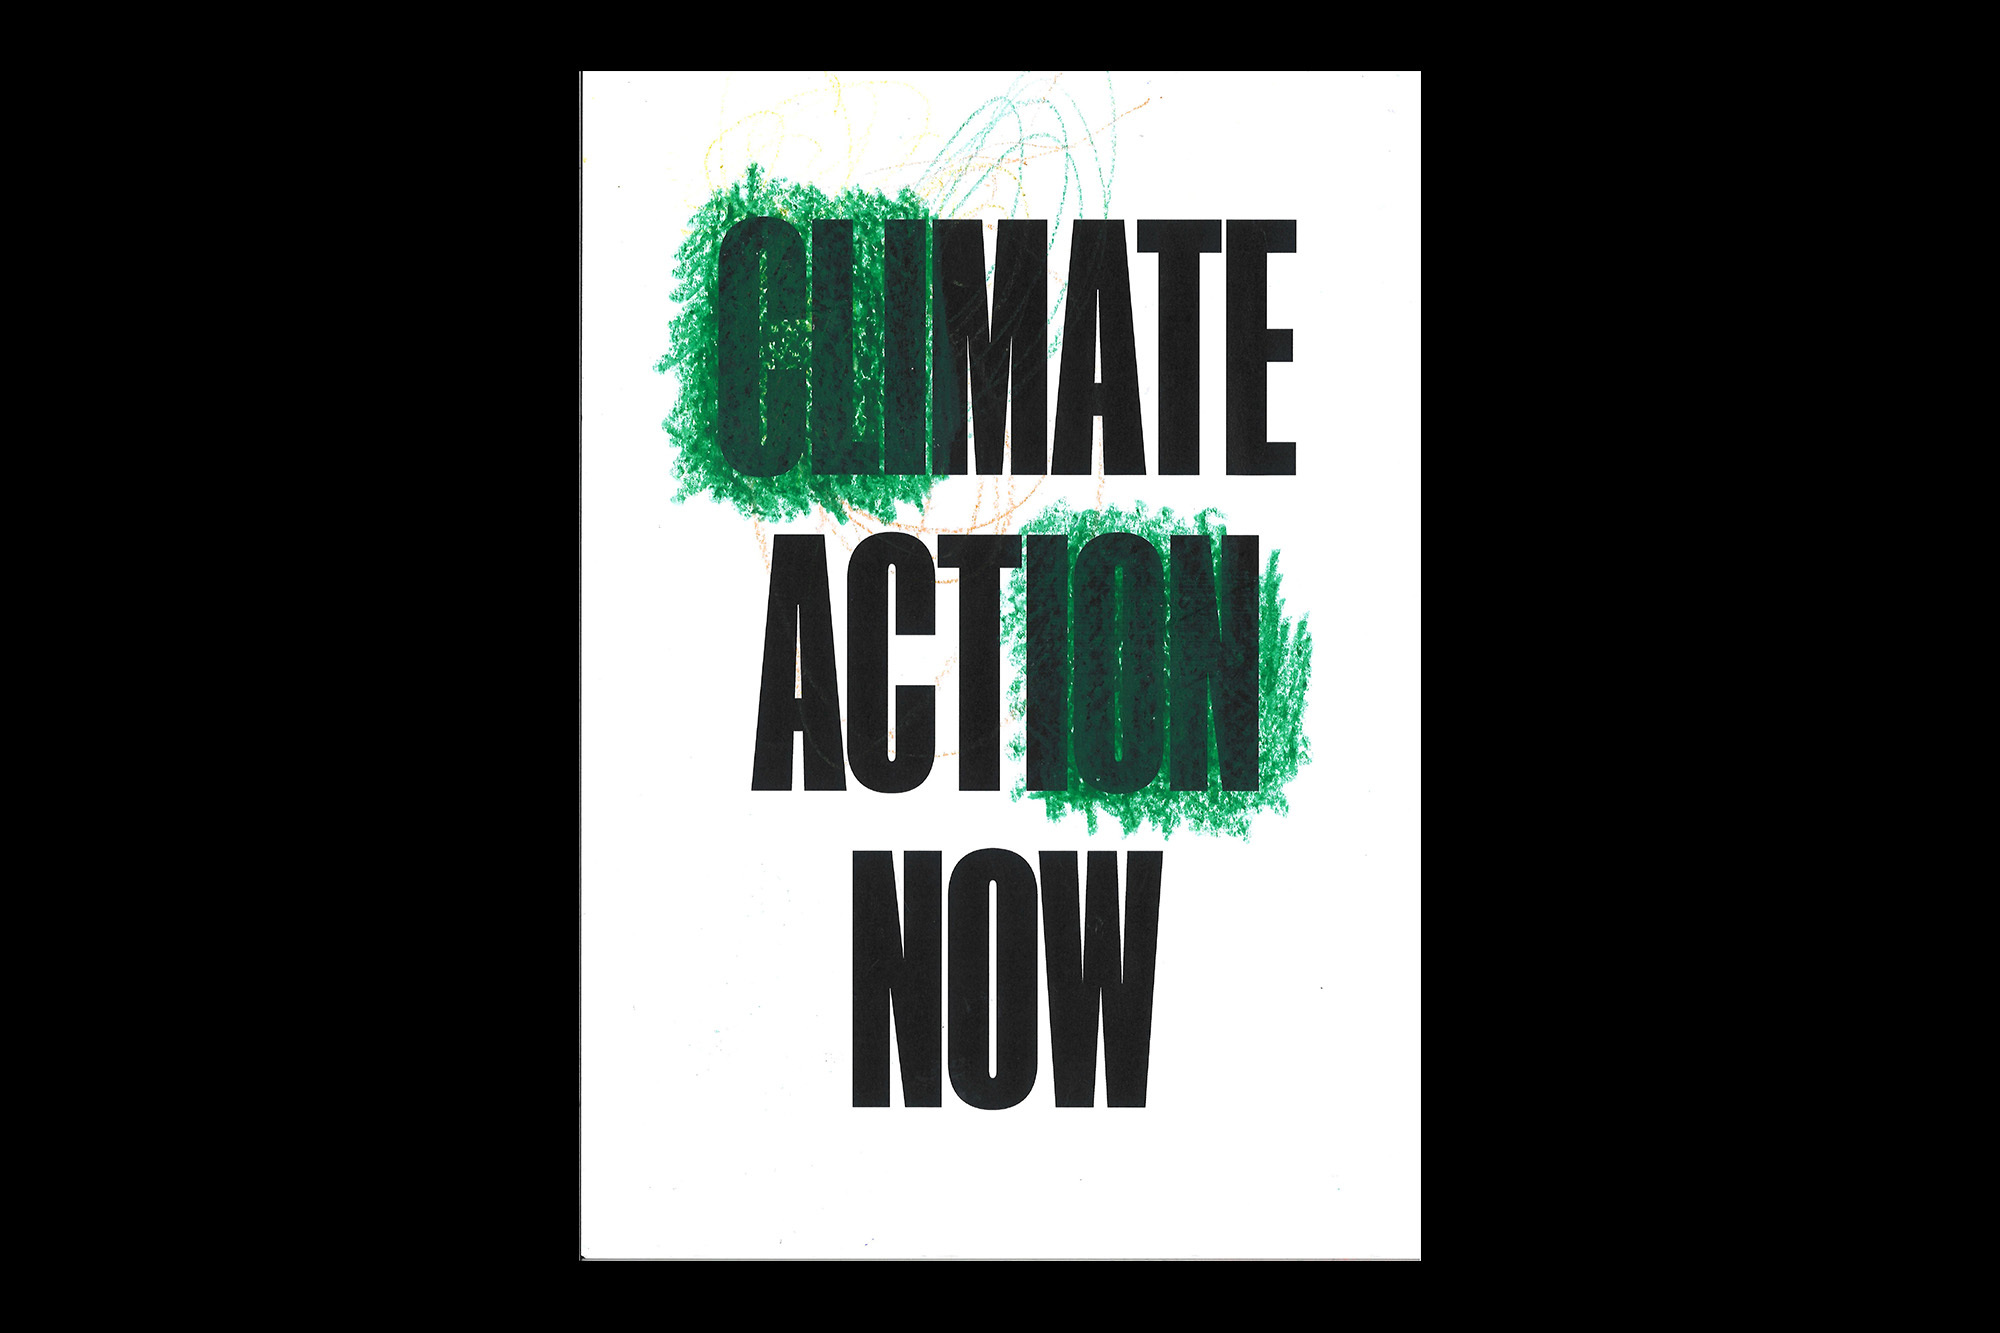 Mate Act Now unites the world's designers with over 130 posters created